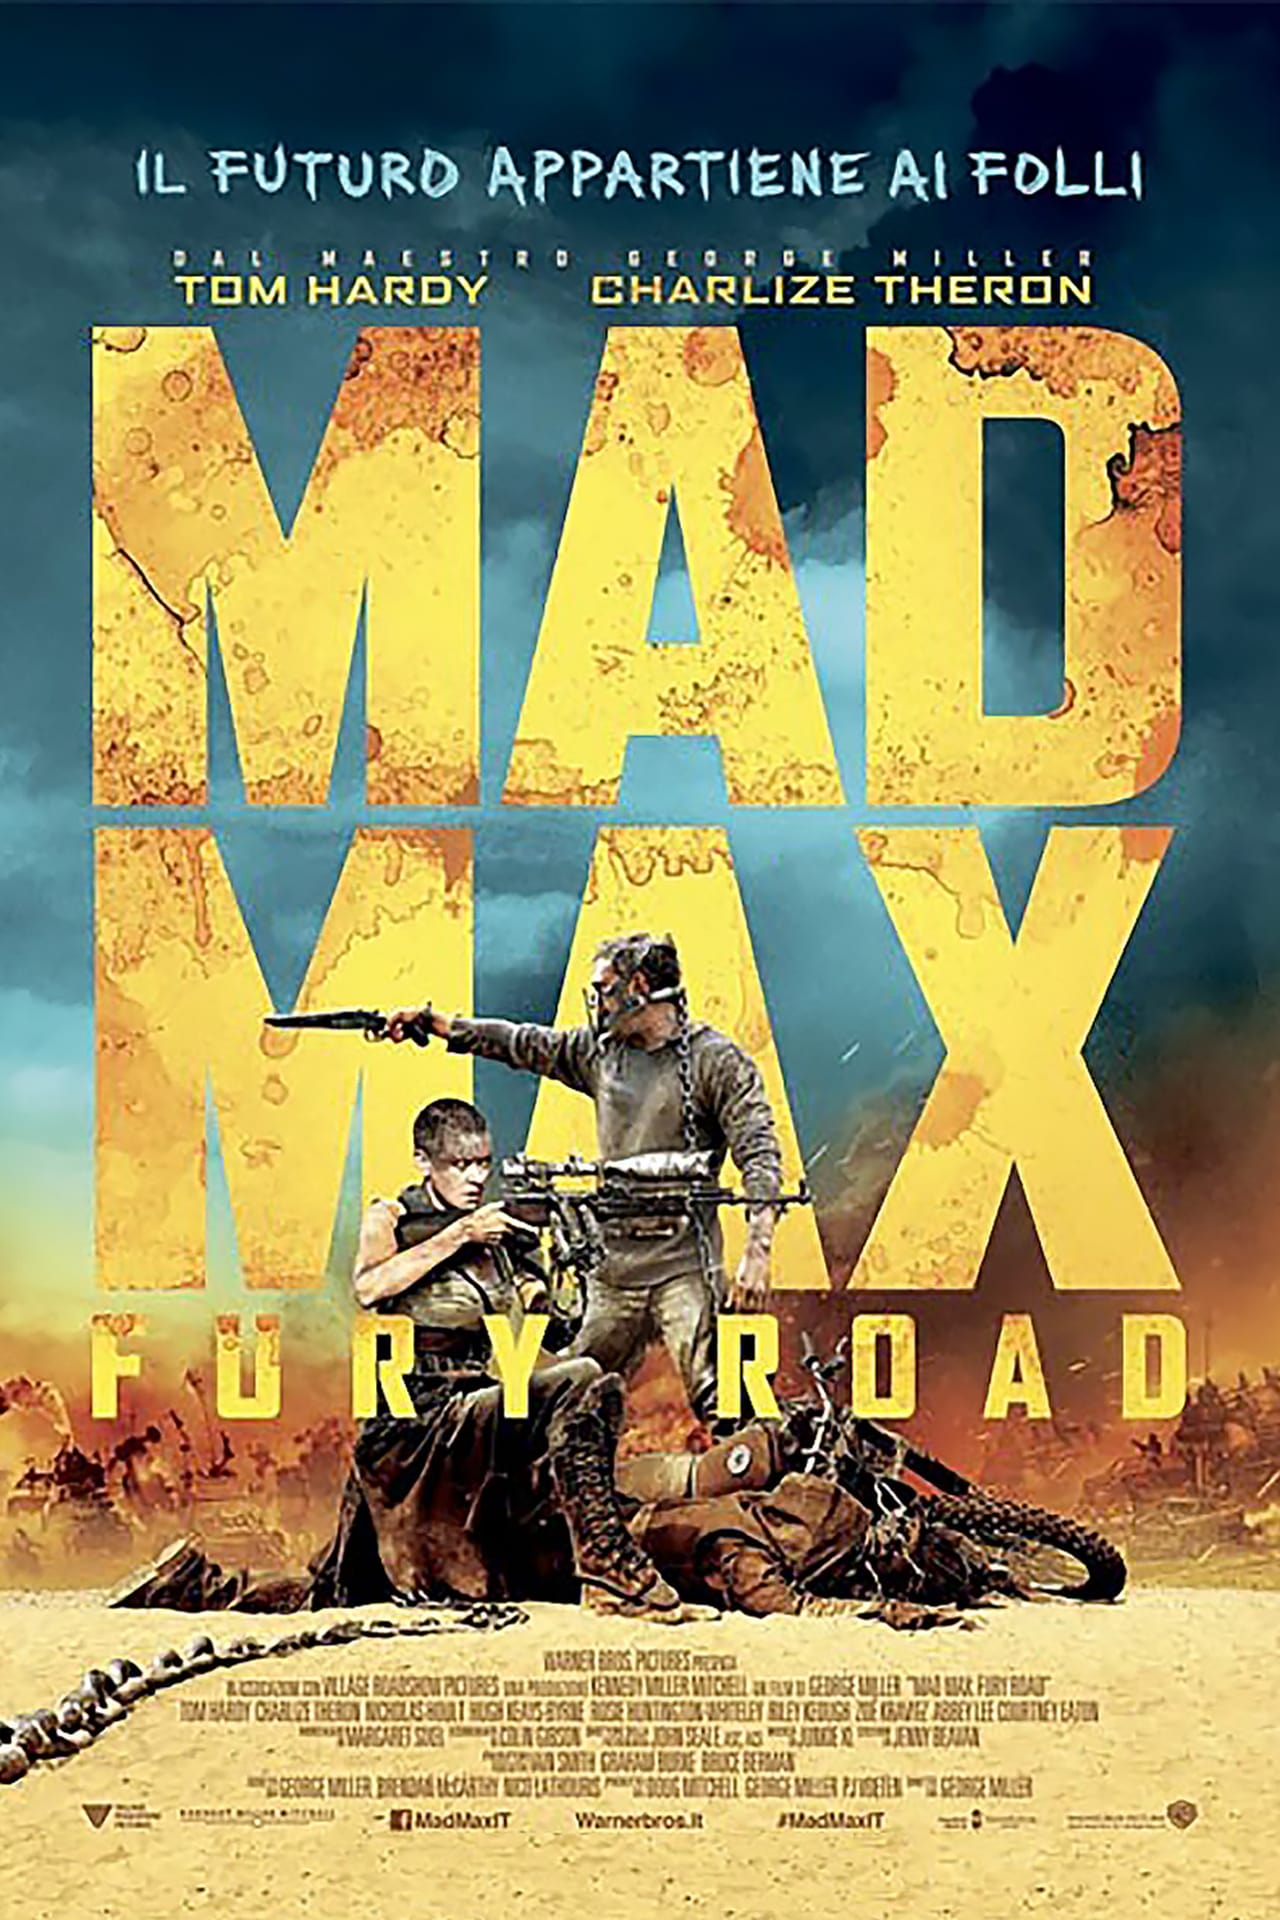 where can i download the movie free mad maz fury road